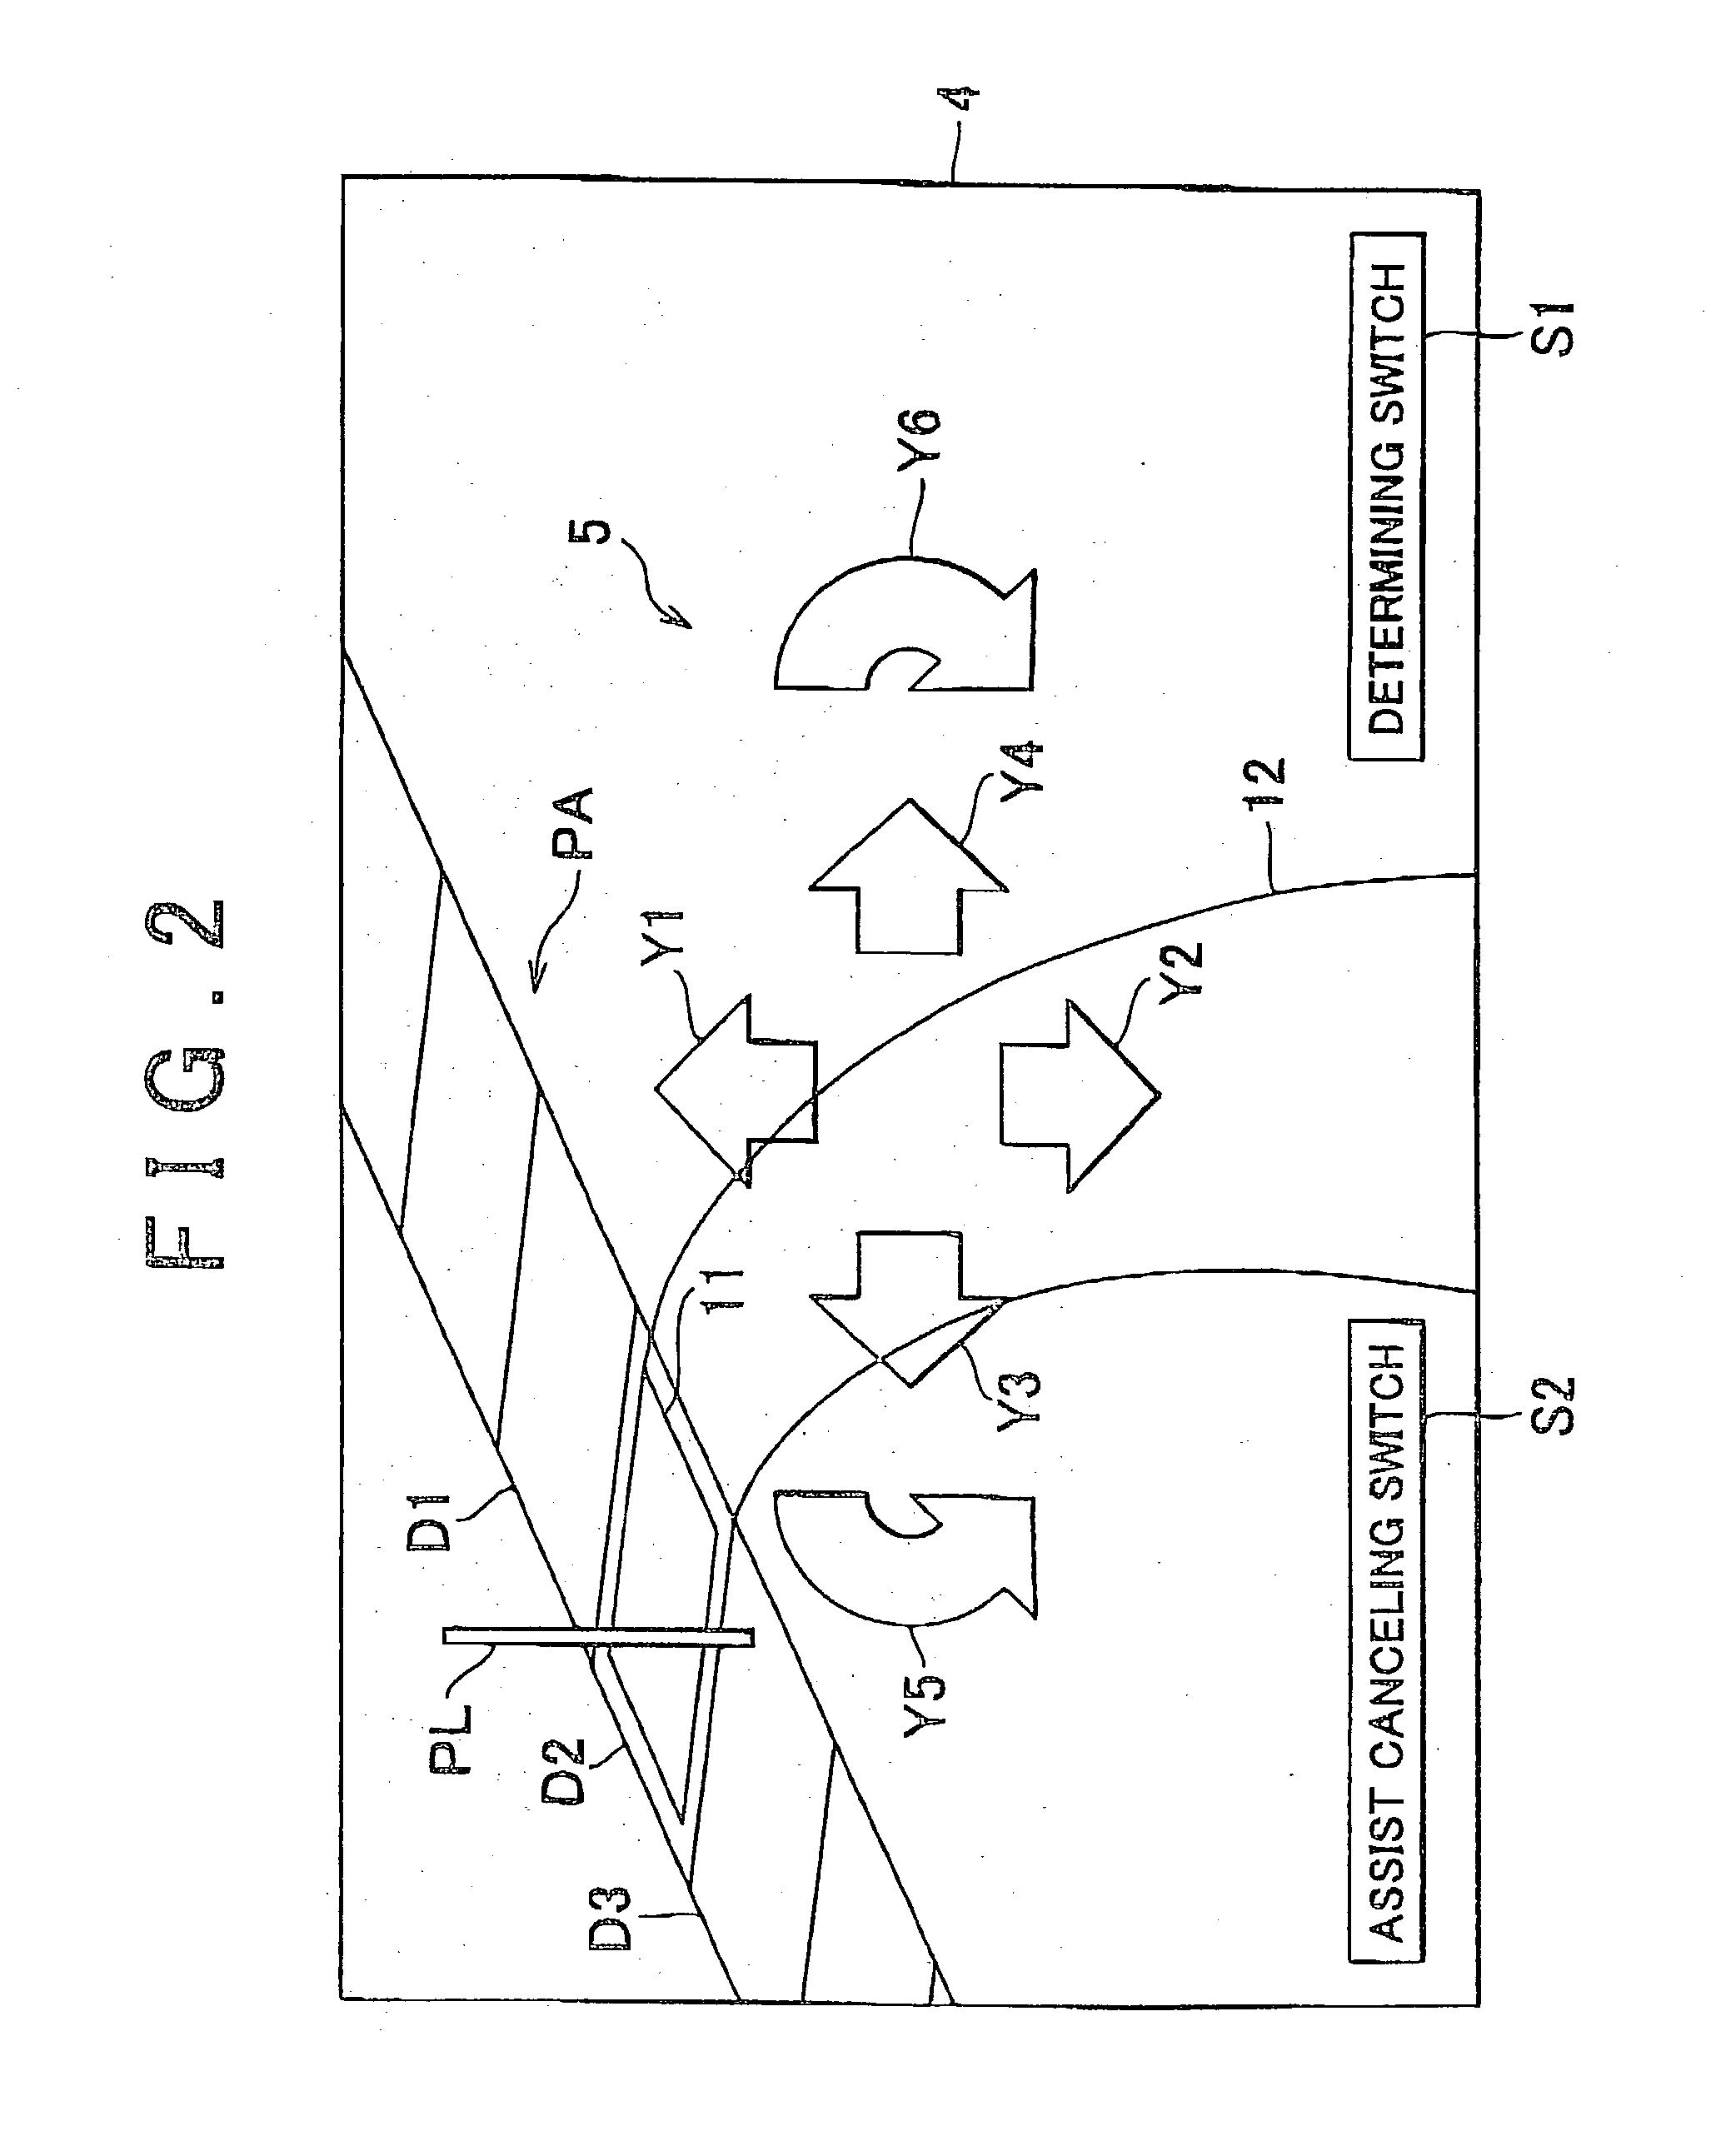 Parking assist device and method for assisting parking